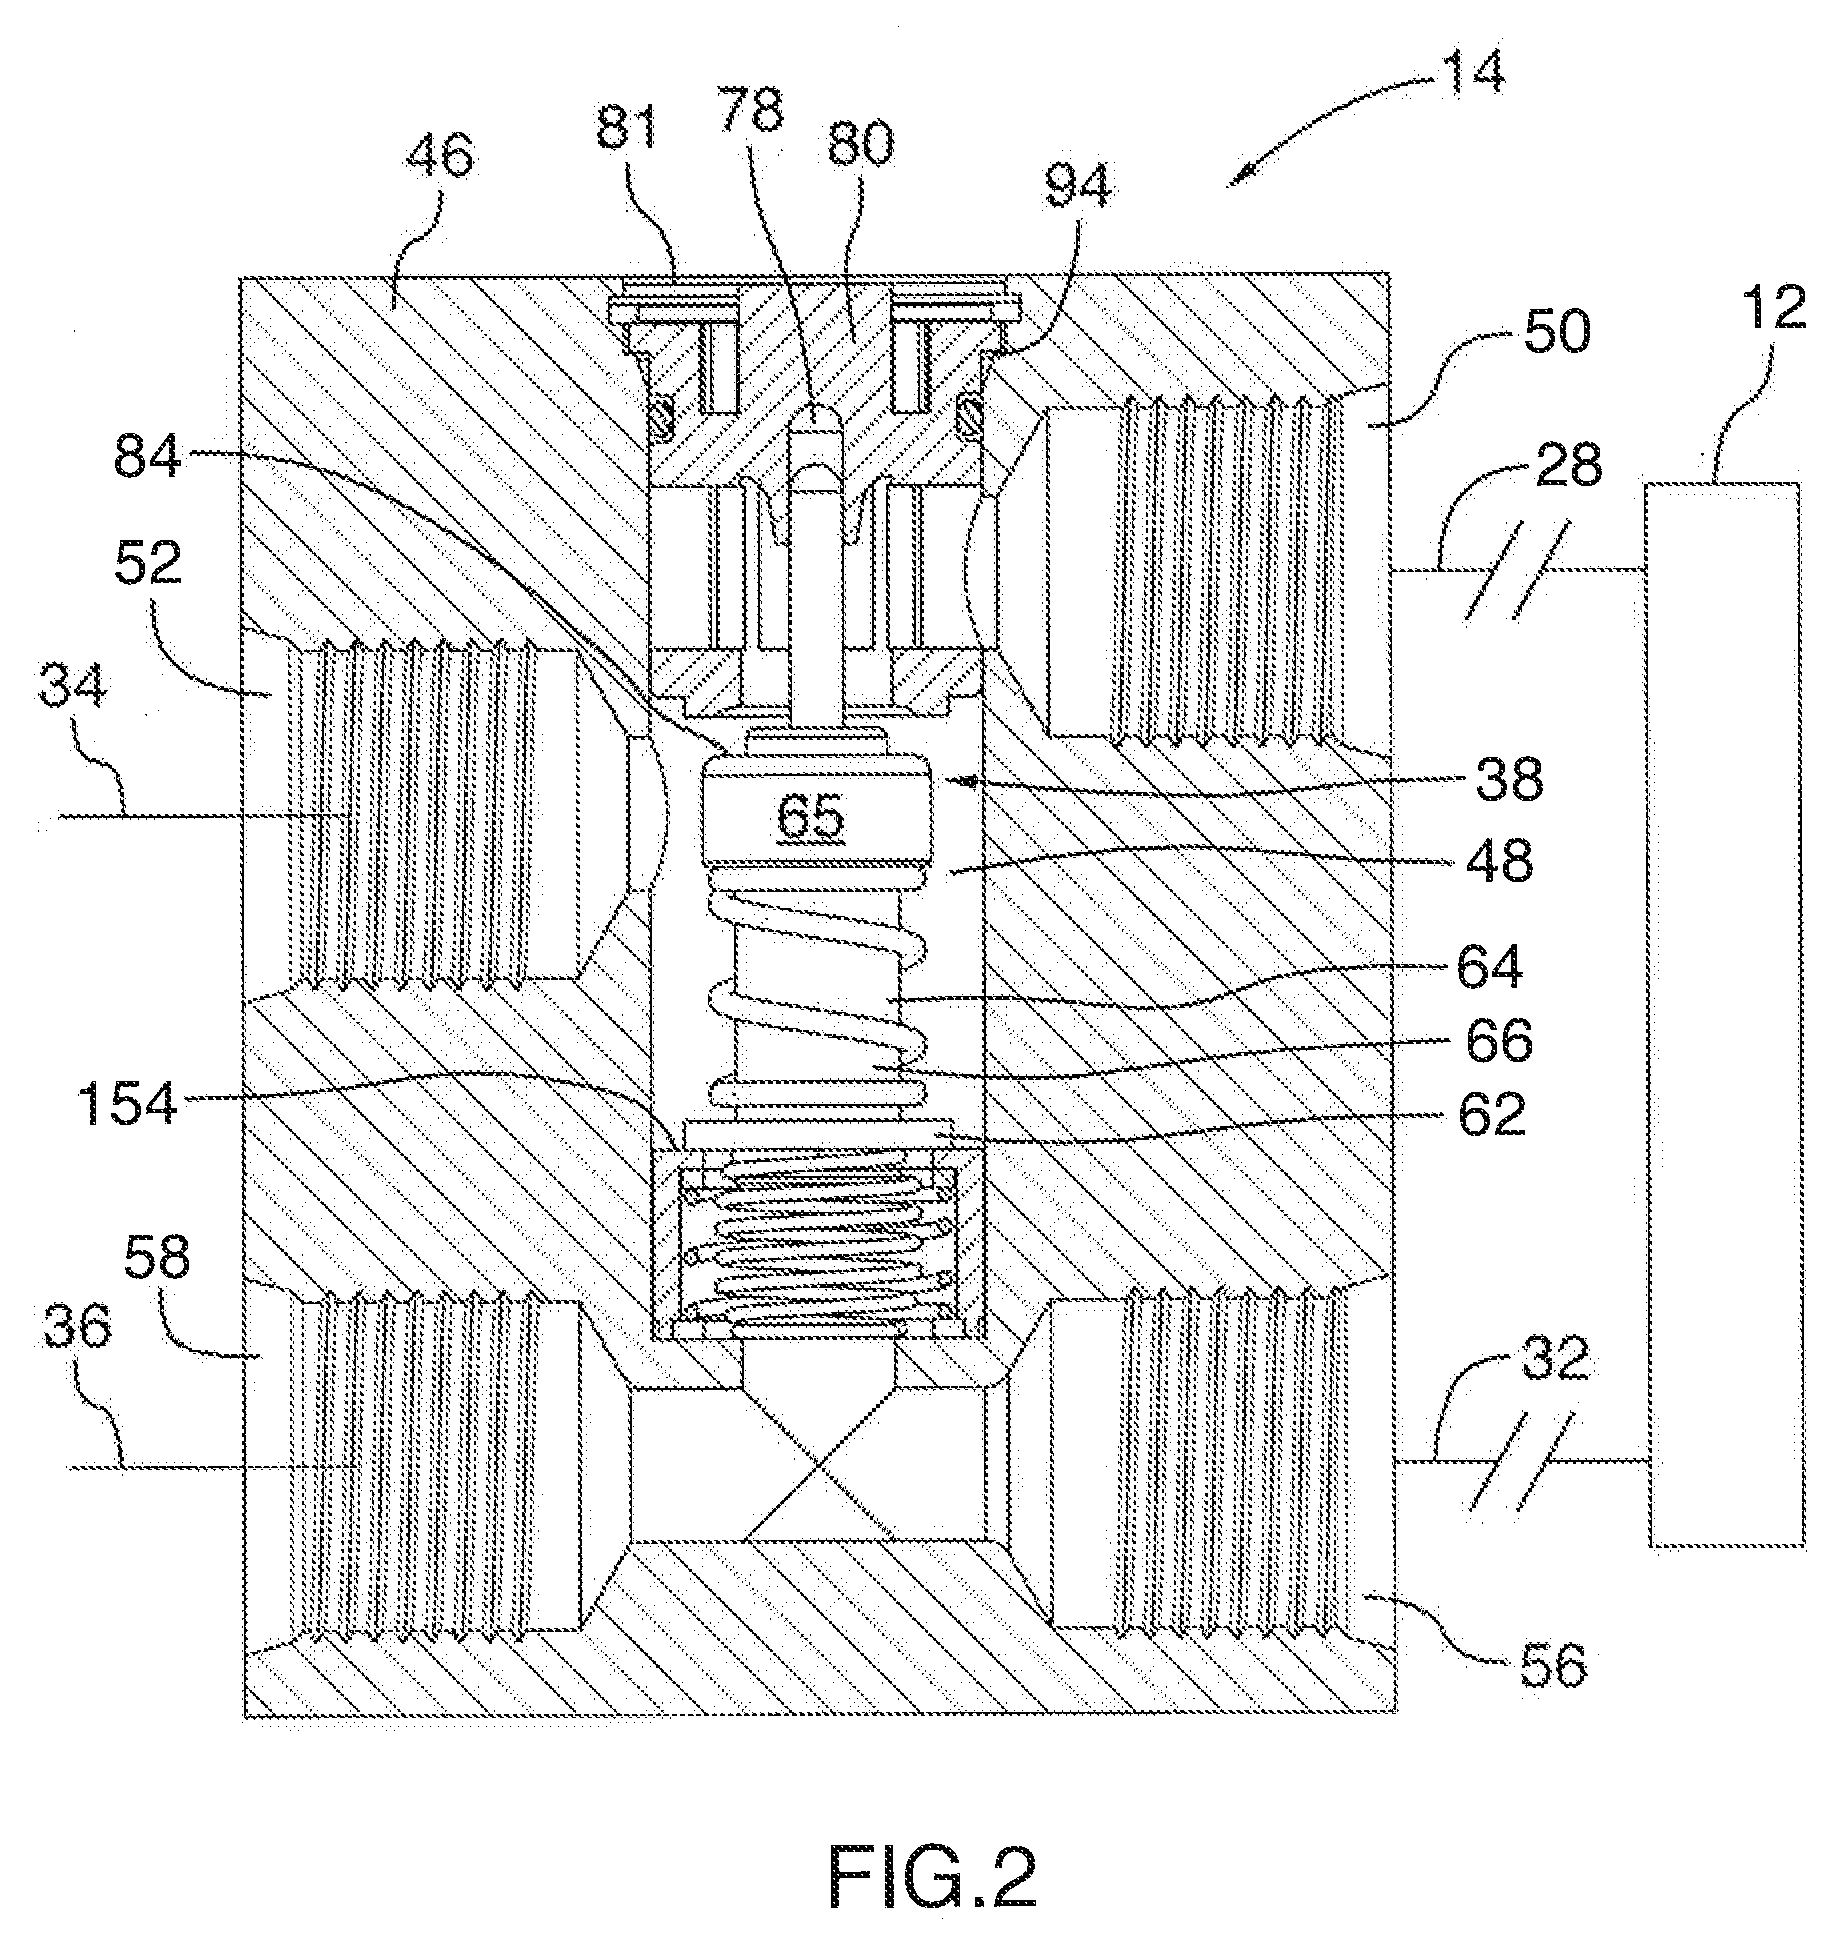 Thermal bypass valve with pressure relief capability